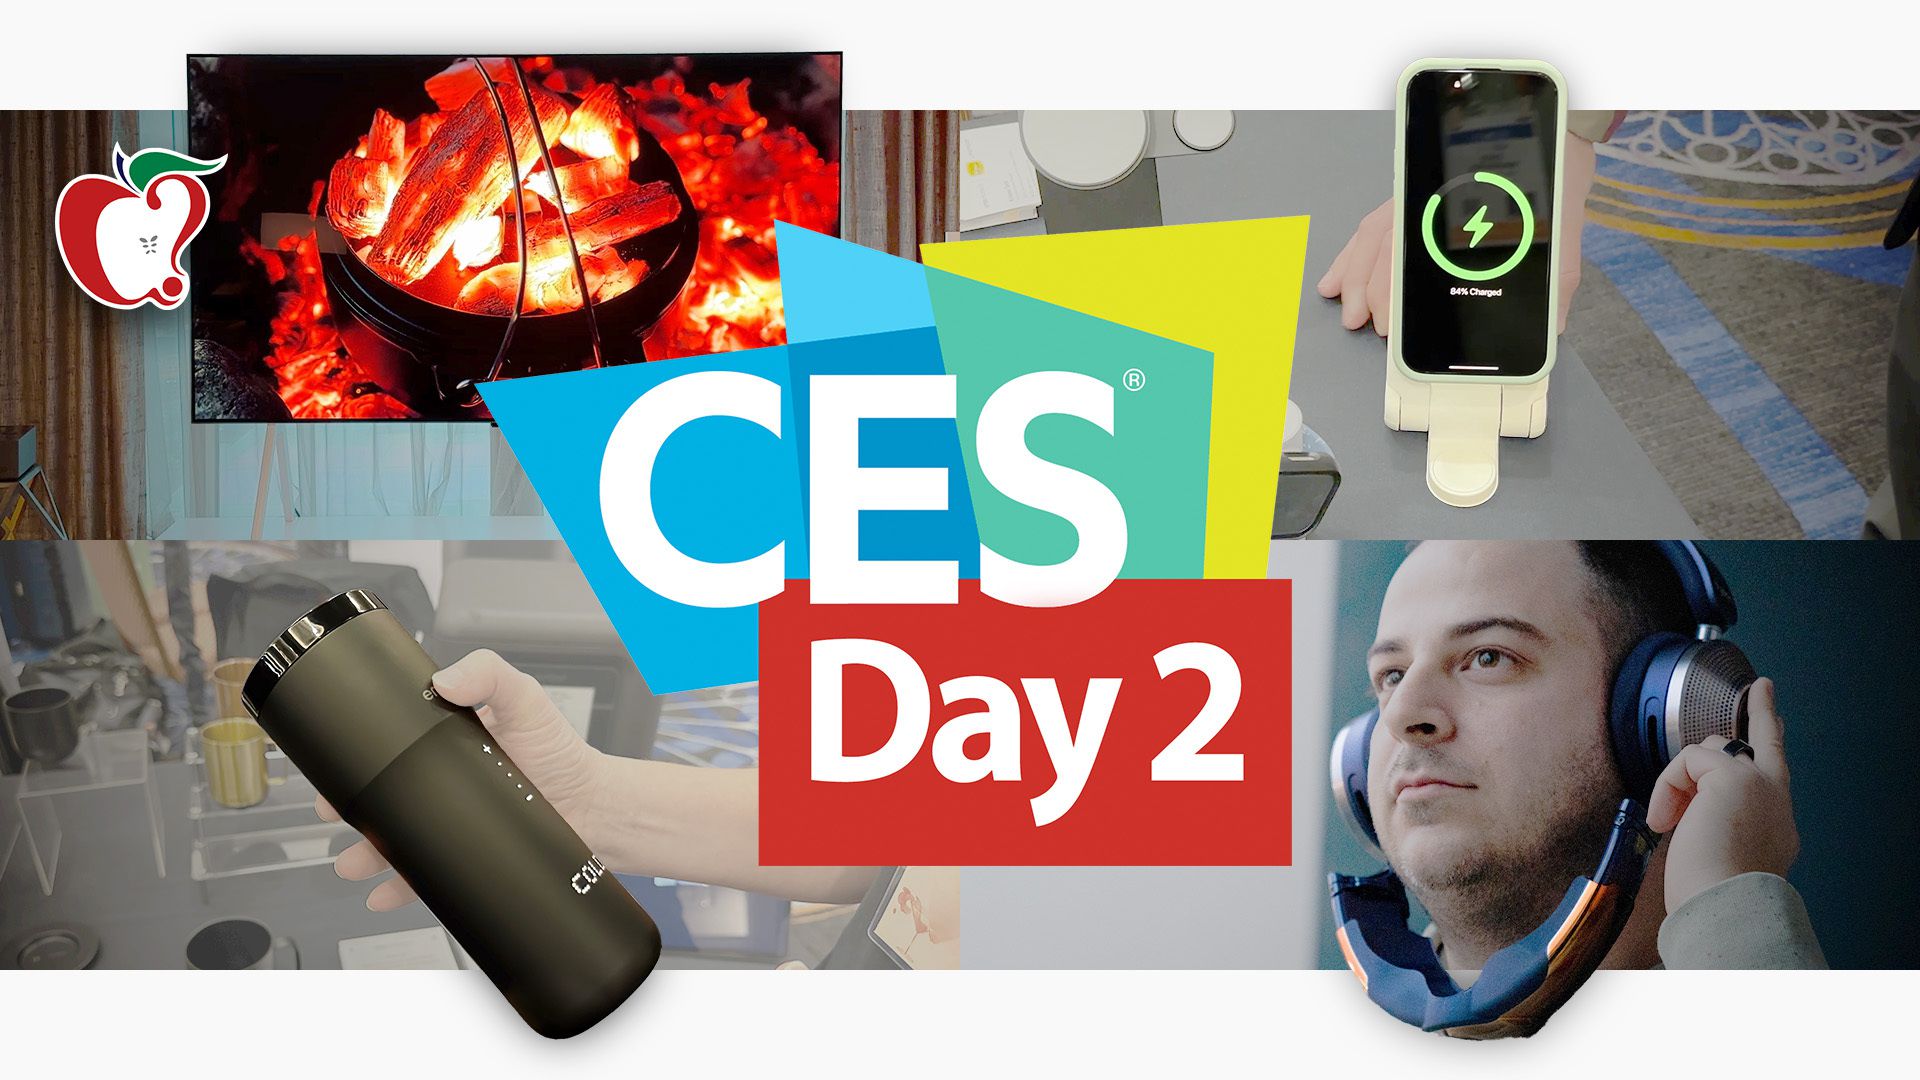 Day 2 CES Video Roundup: Dyson's $949 Purifying Headphones, LG's New 'Zero Connect' TV, Ember's Find My Mug and More - macrumors.com